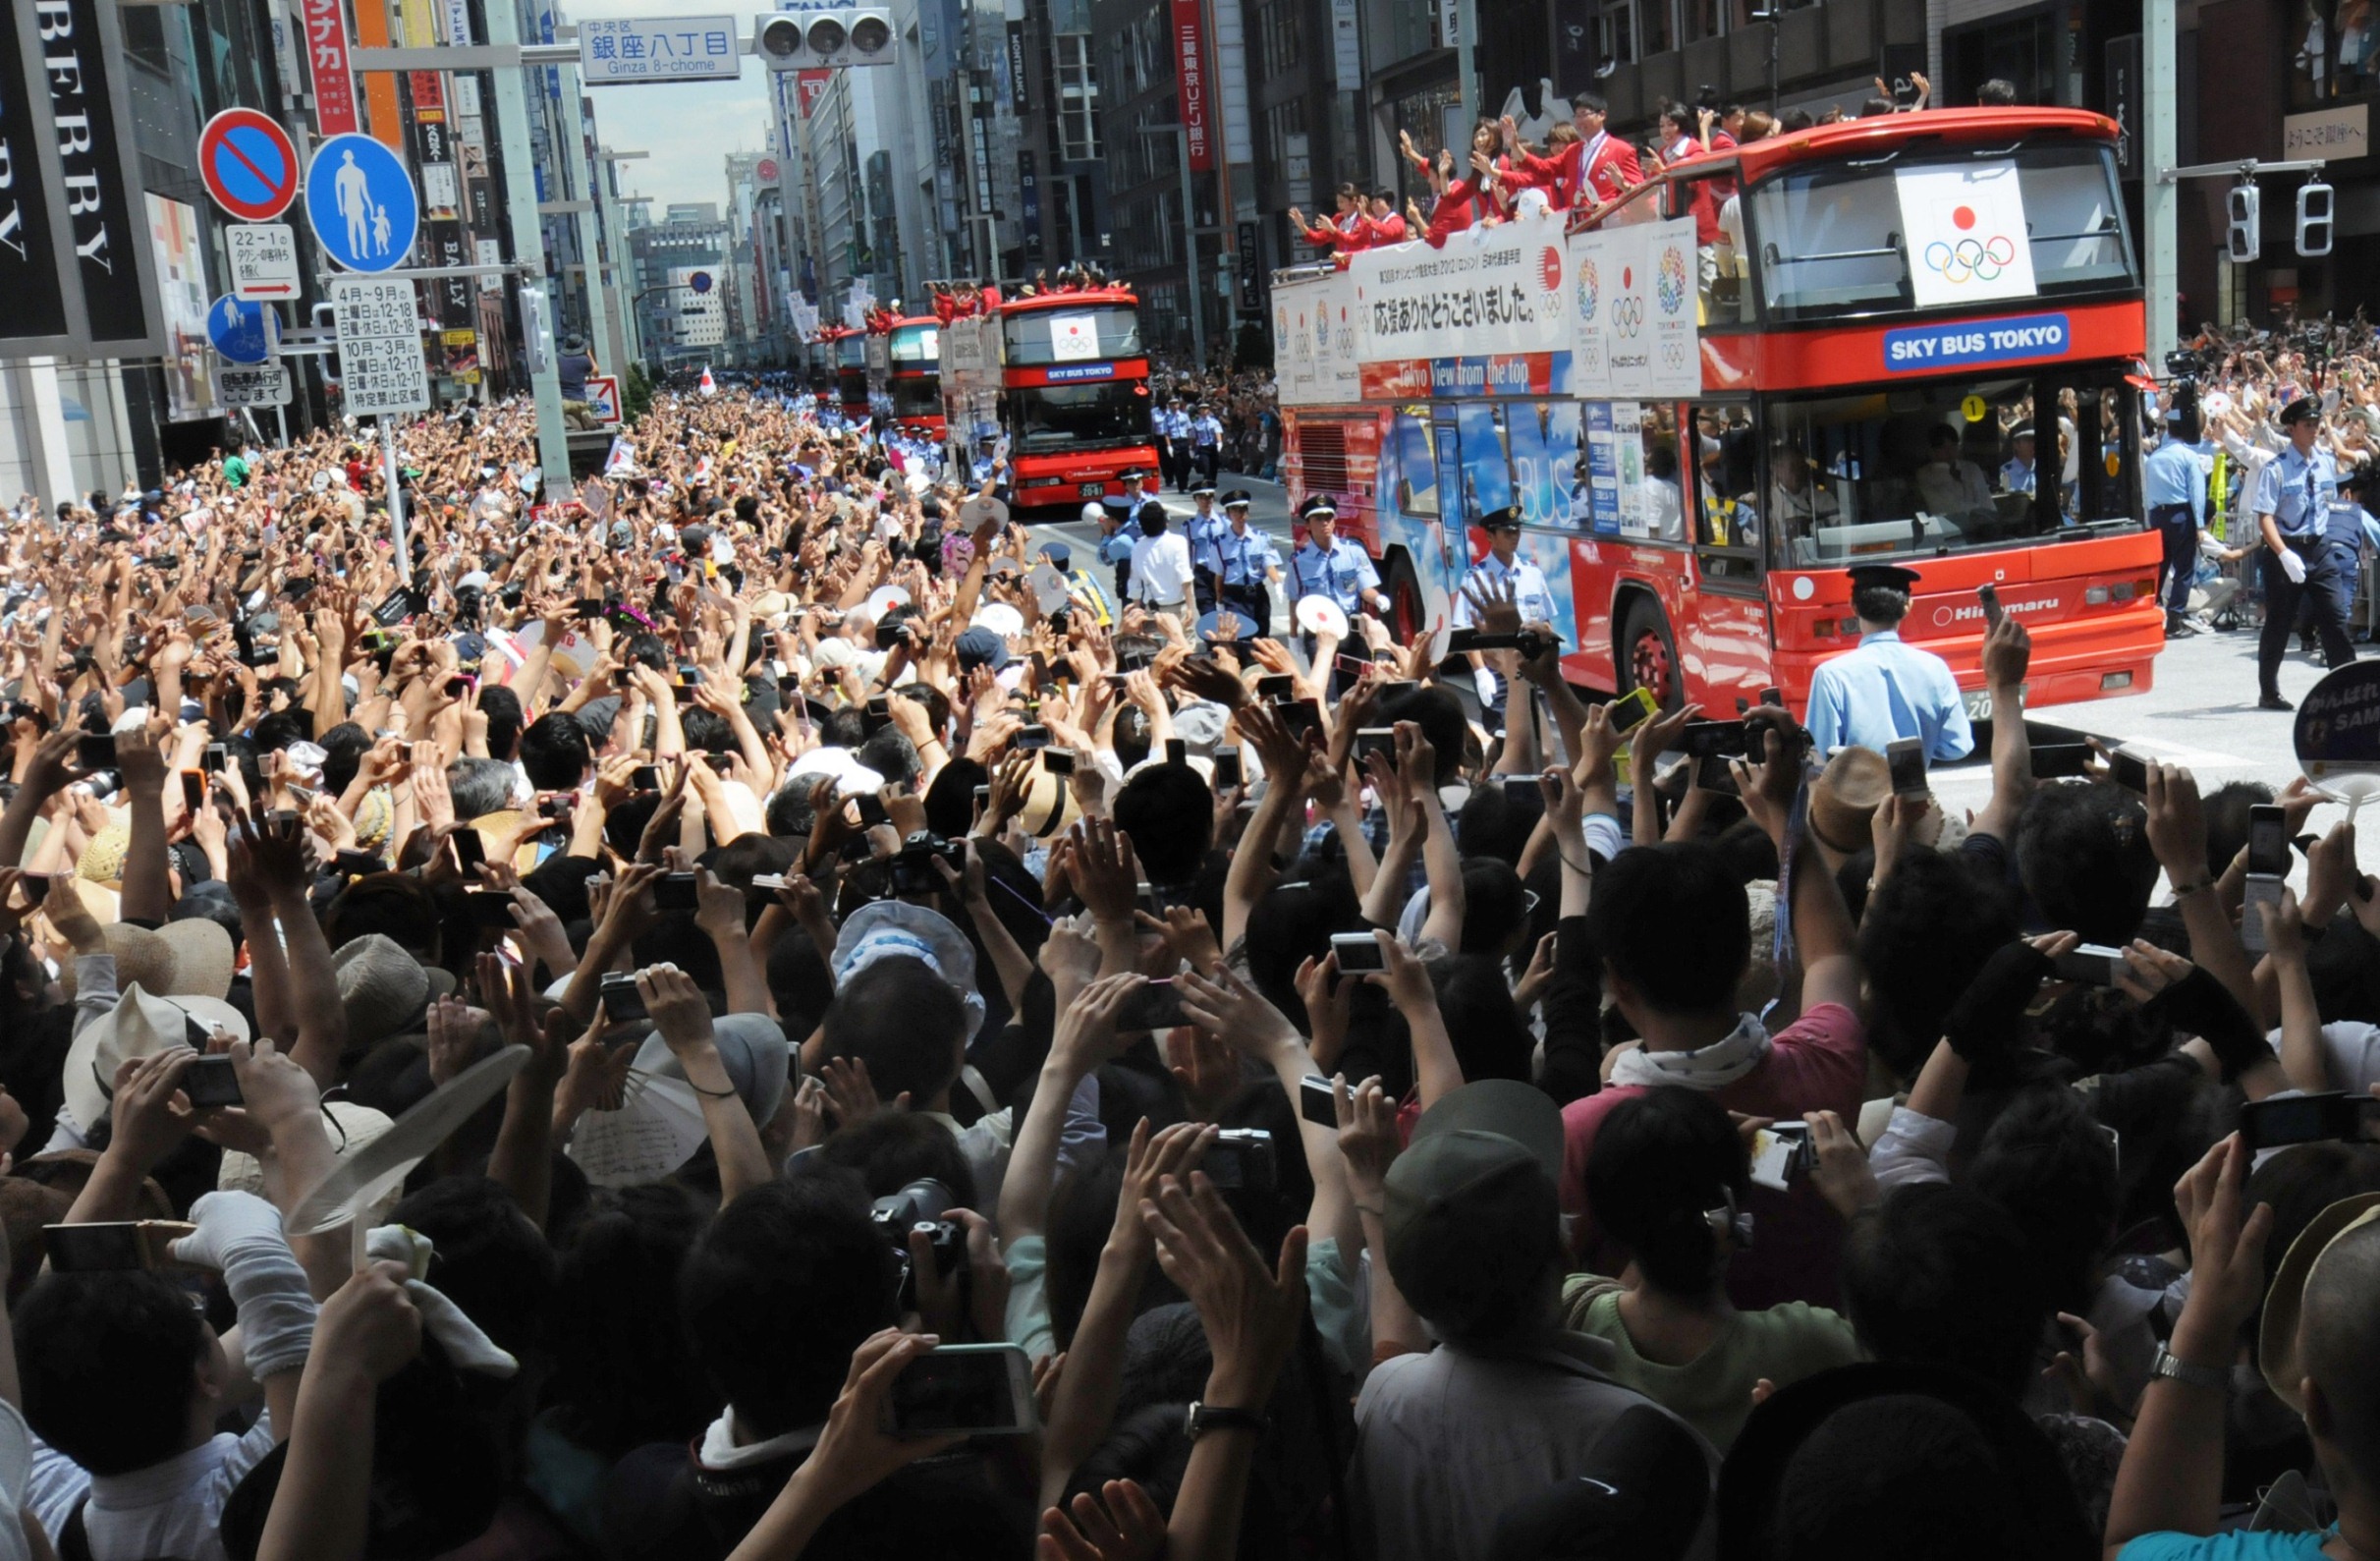 London 2012 victory parade on double decker bus 2